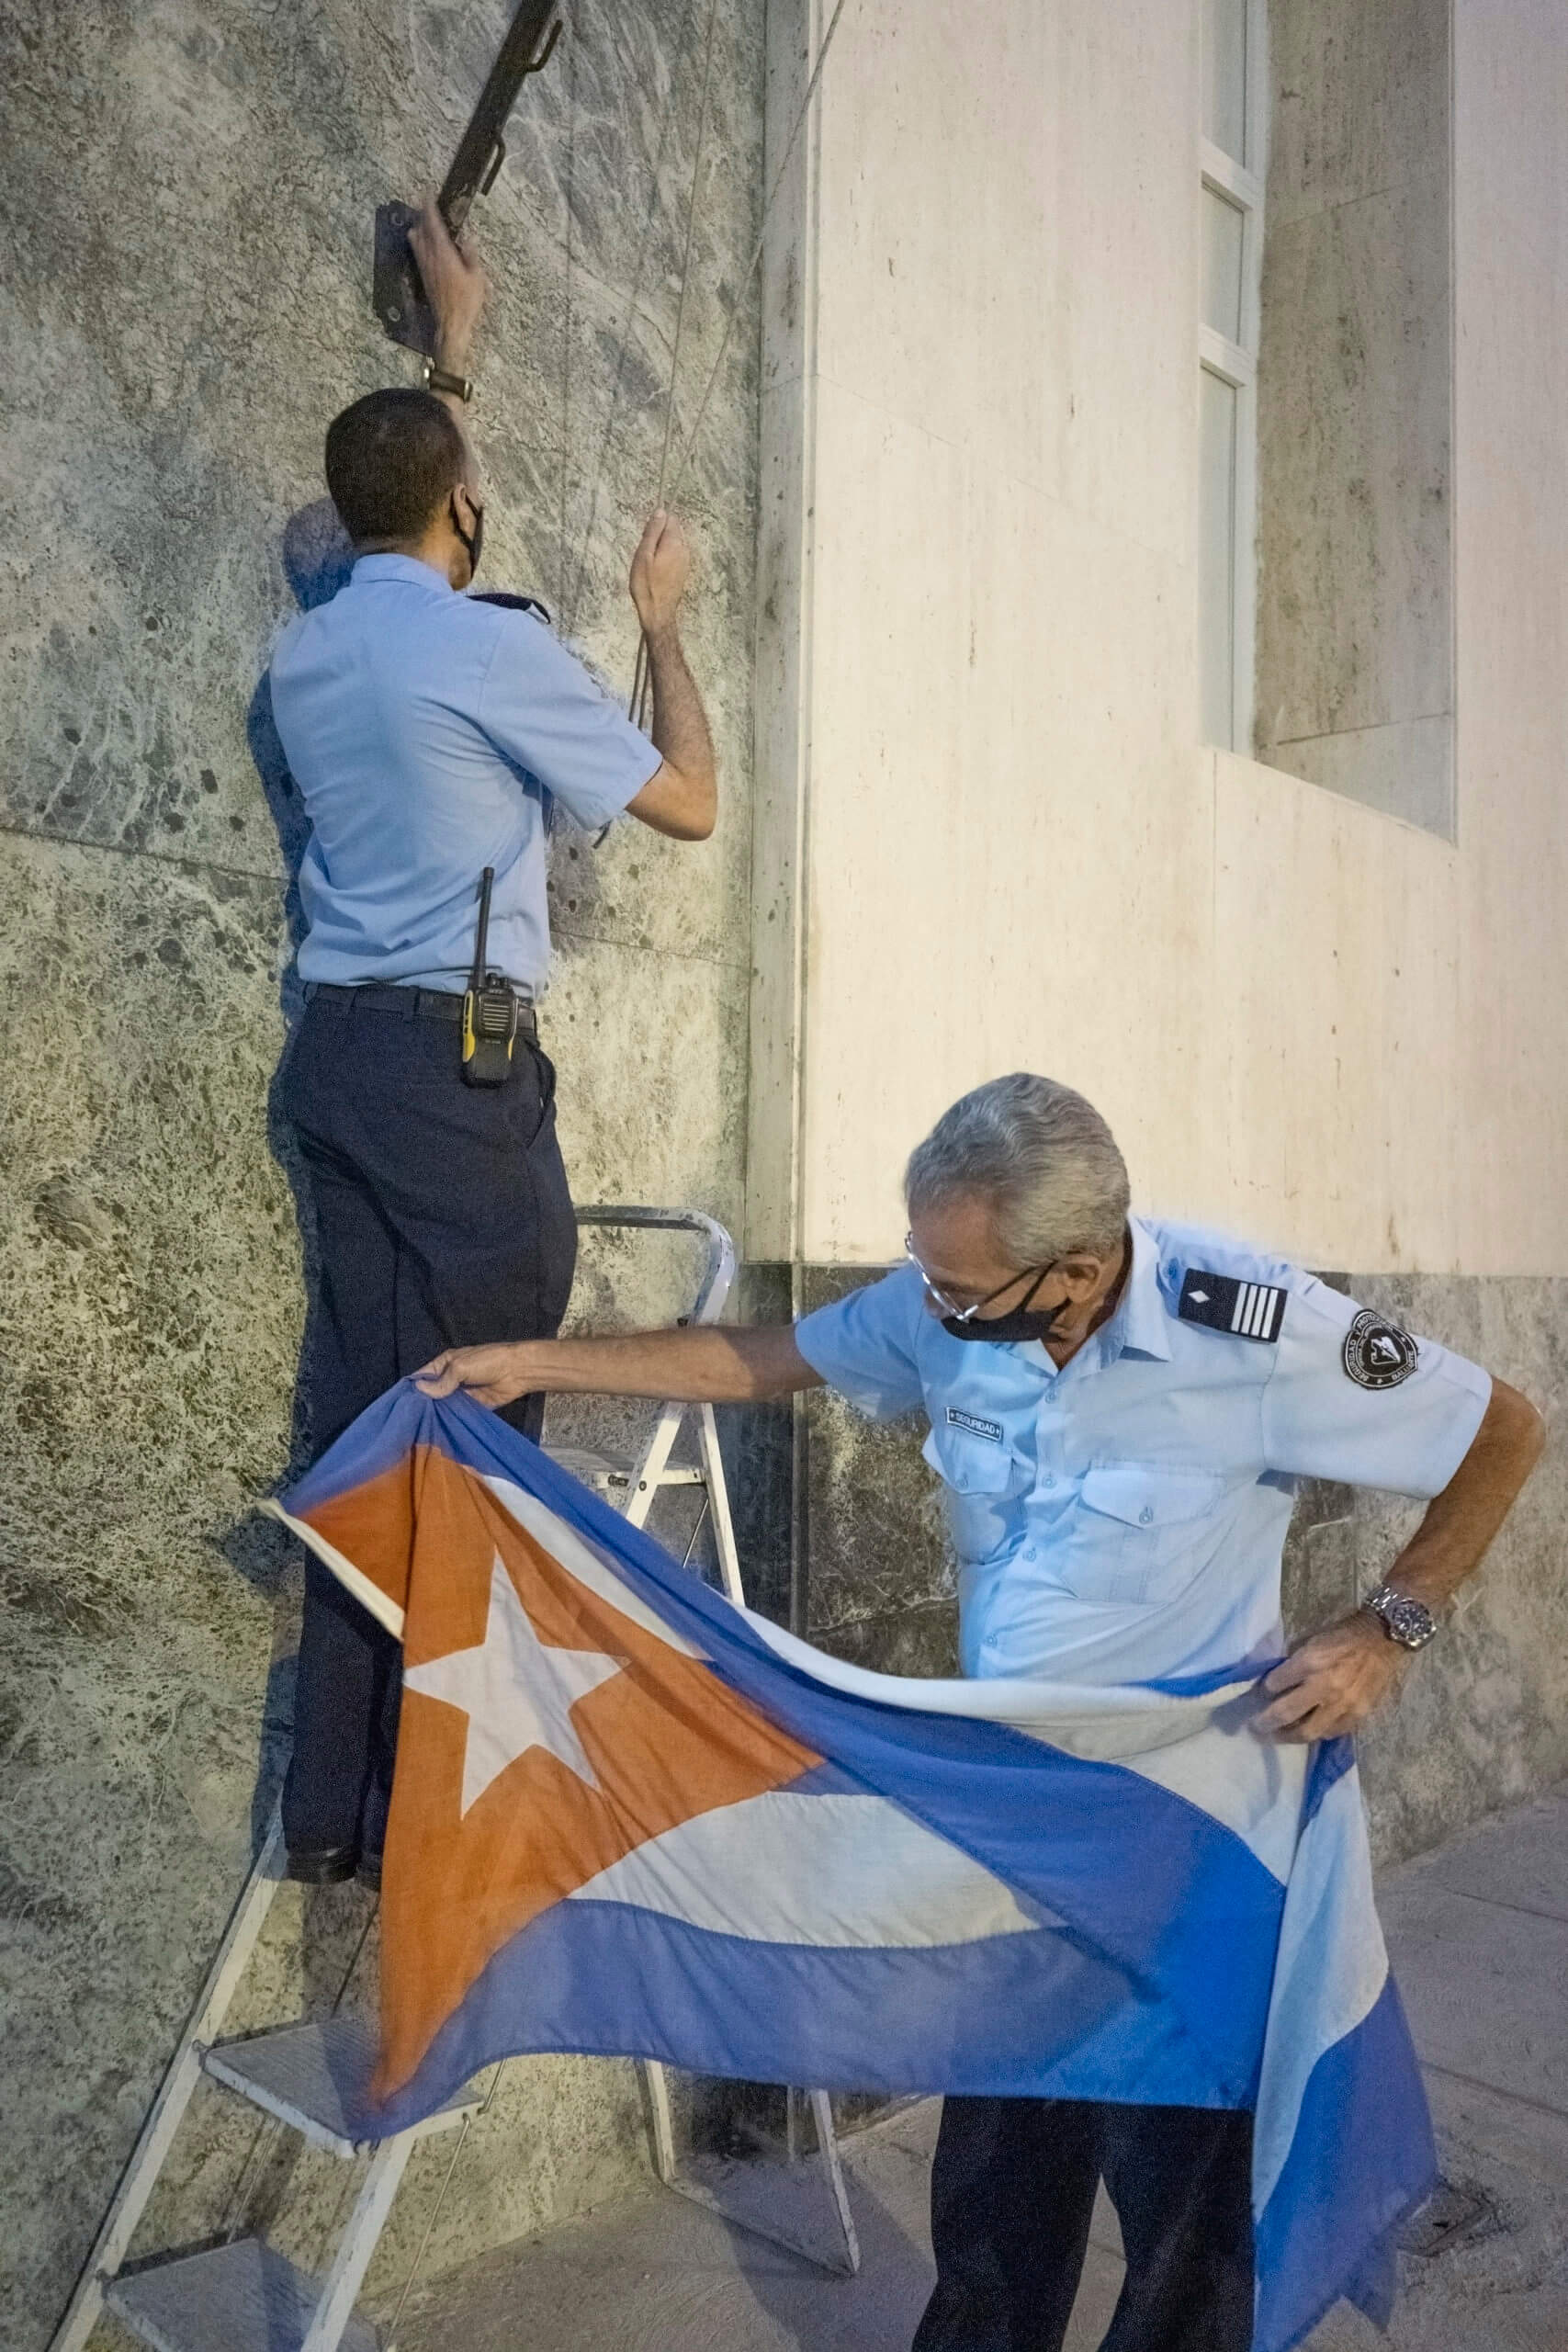 Military guards in the Habana Vieja district of the capital remove the Cuban flag at the end of the day. Penitents outside the Church of San Lazaro near Havana. © 2022 John D. Elliott • www.TheHumanPulse.com